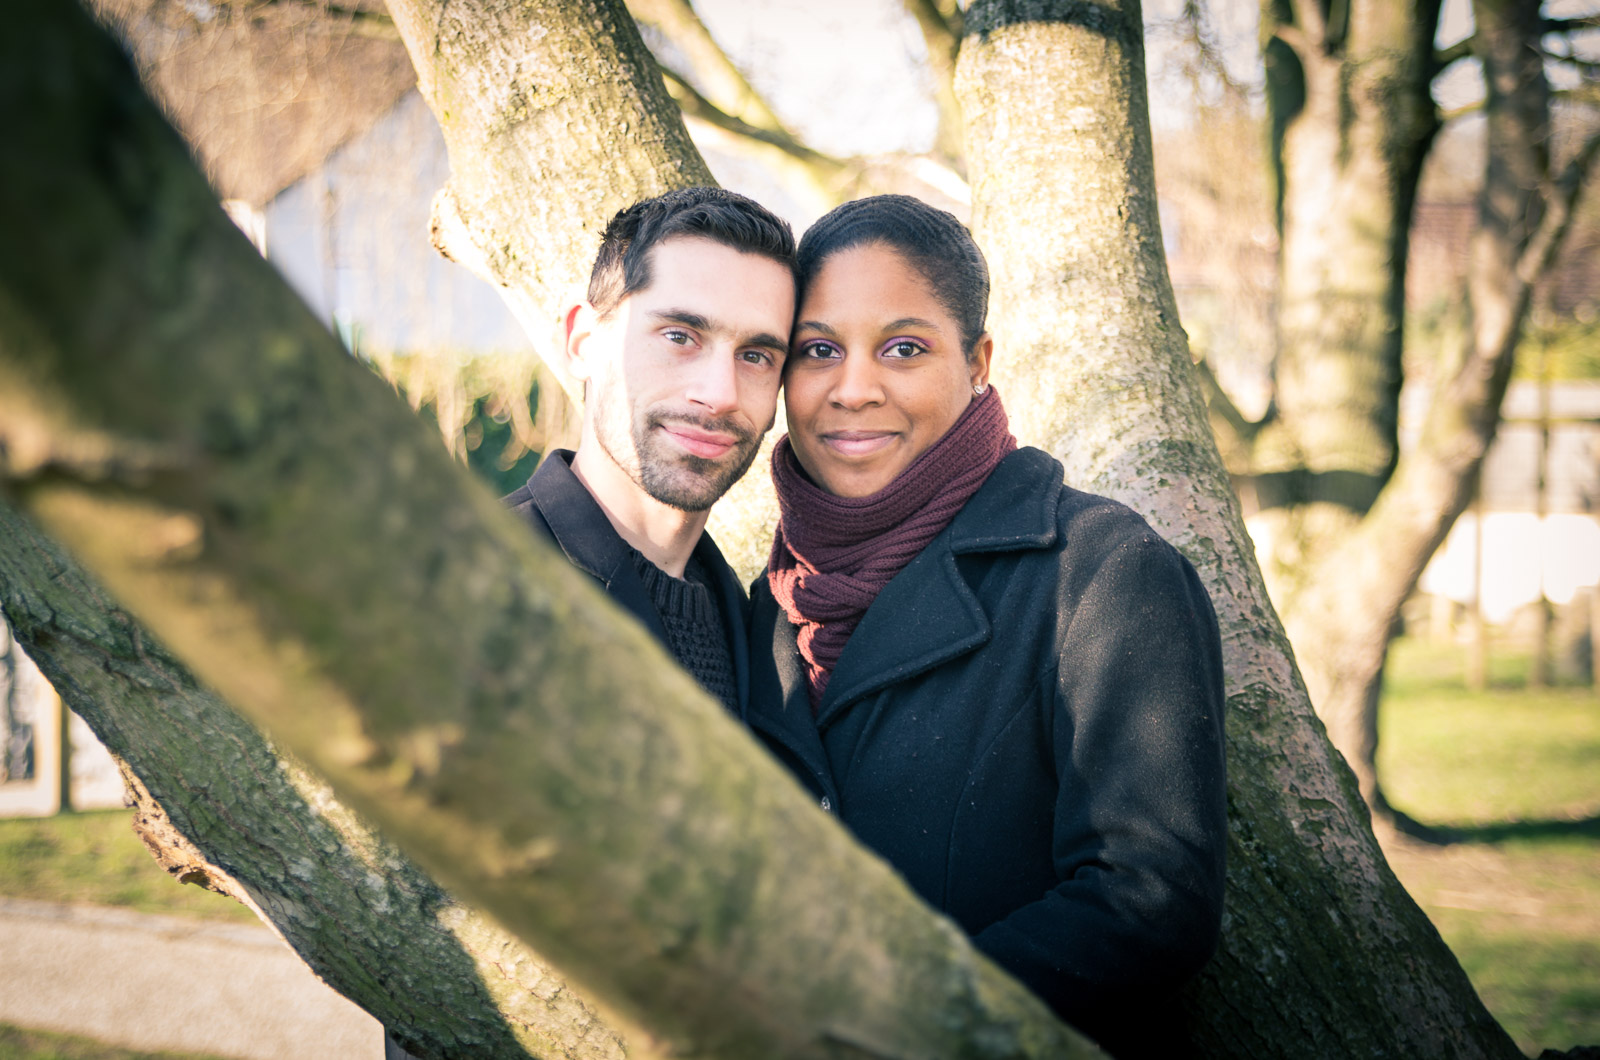 A sunny engagement session for Murielle and Luis